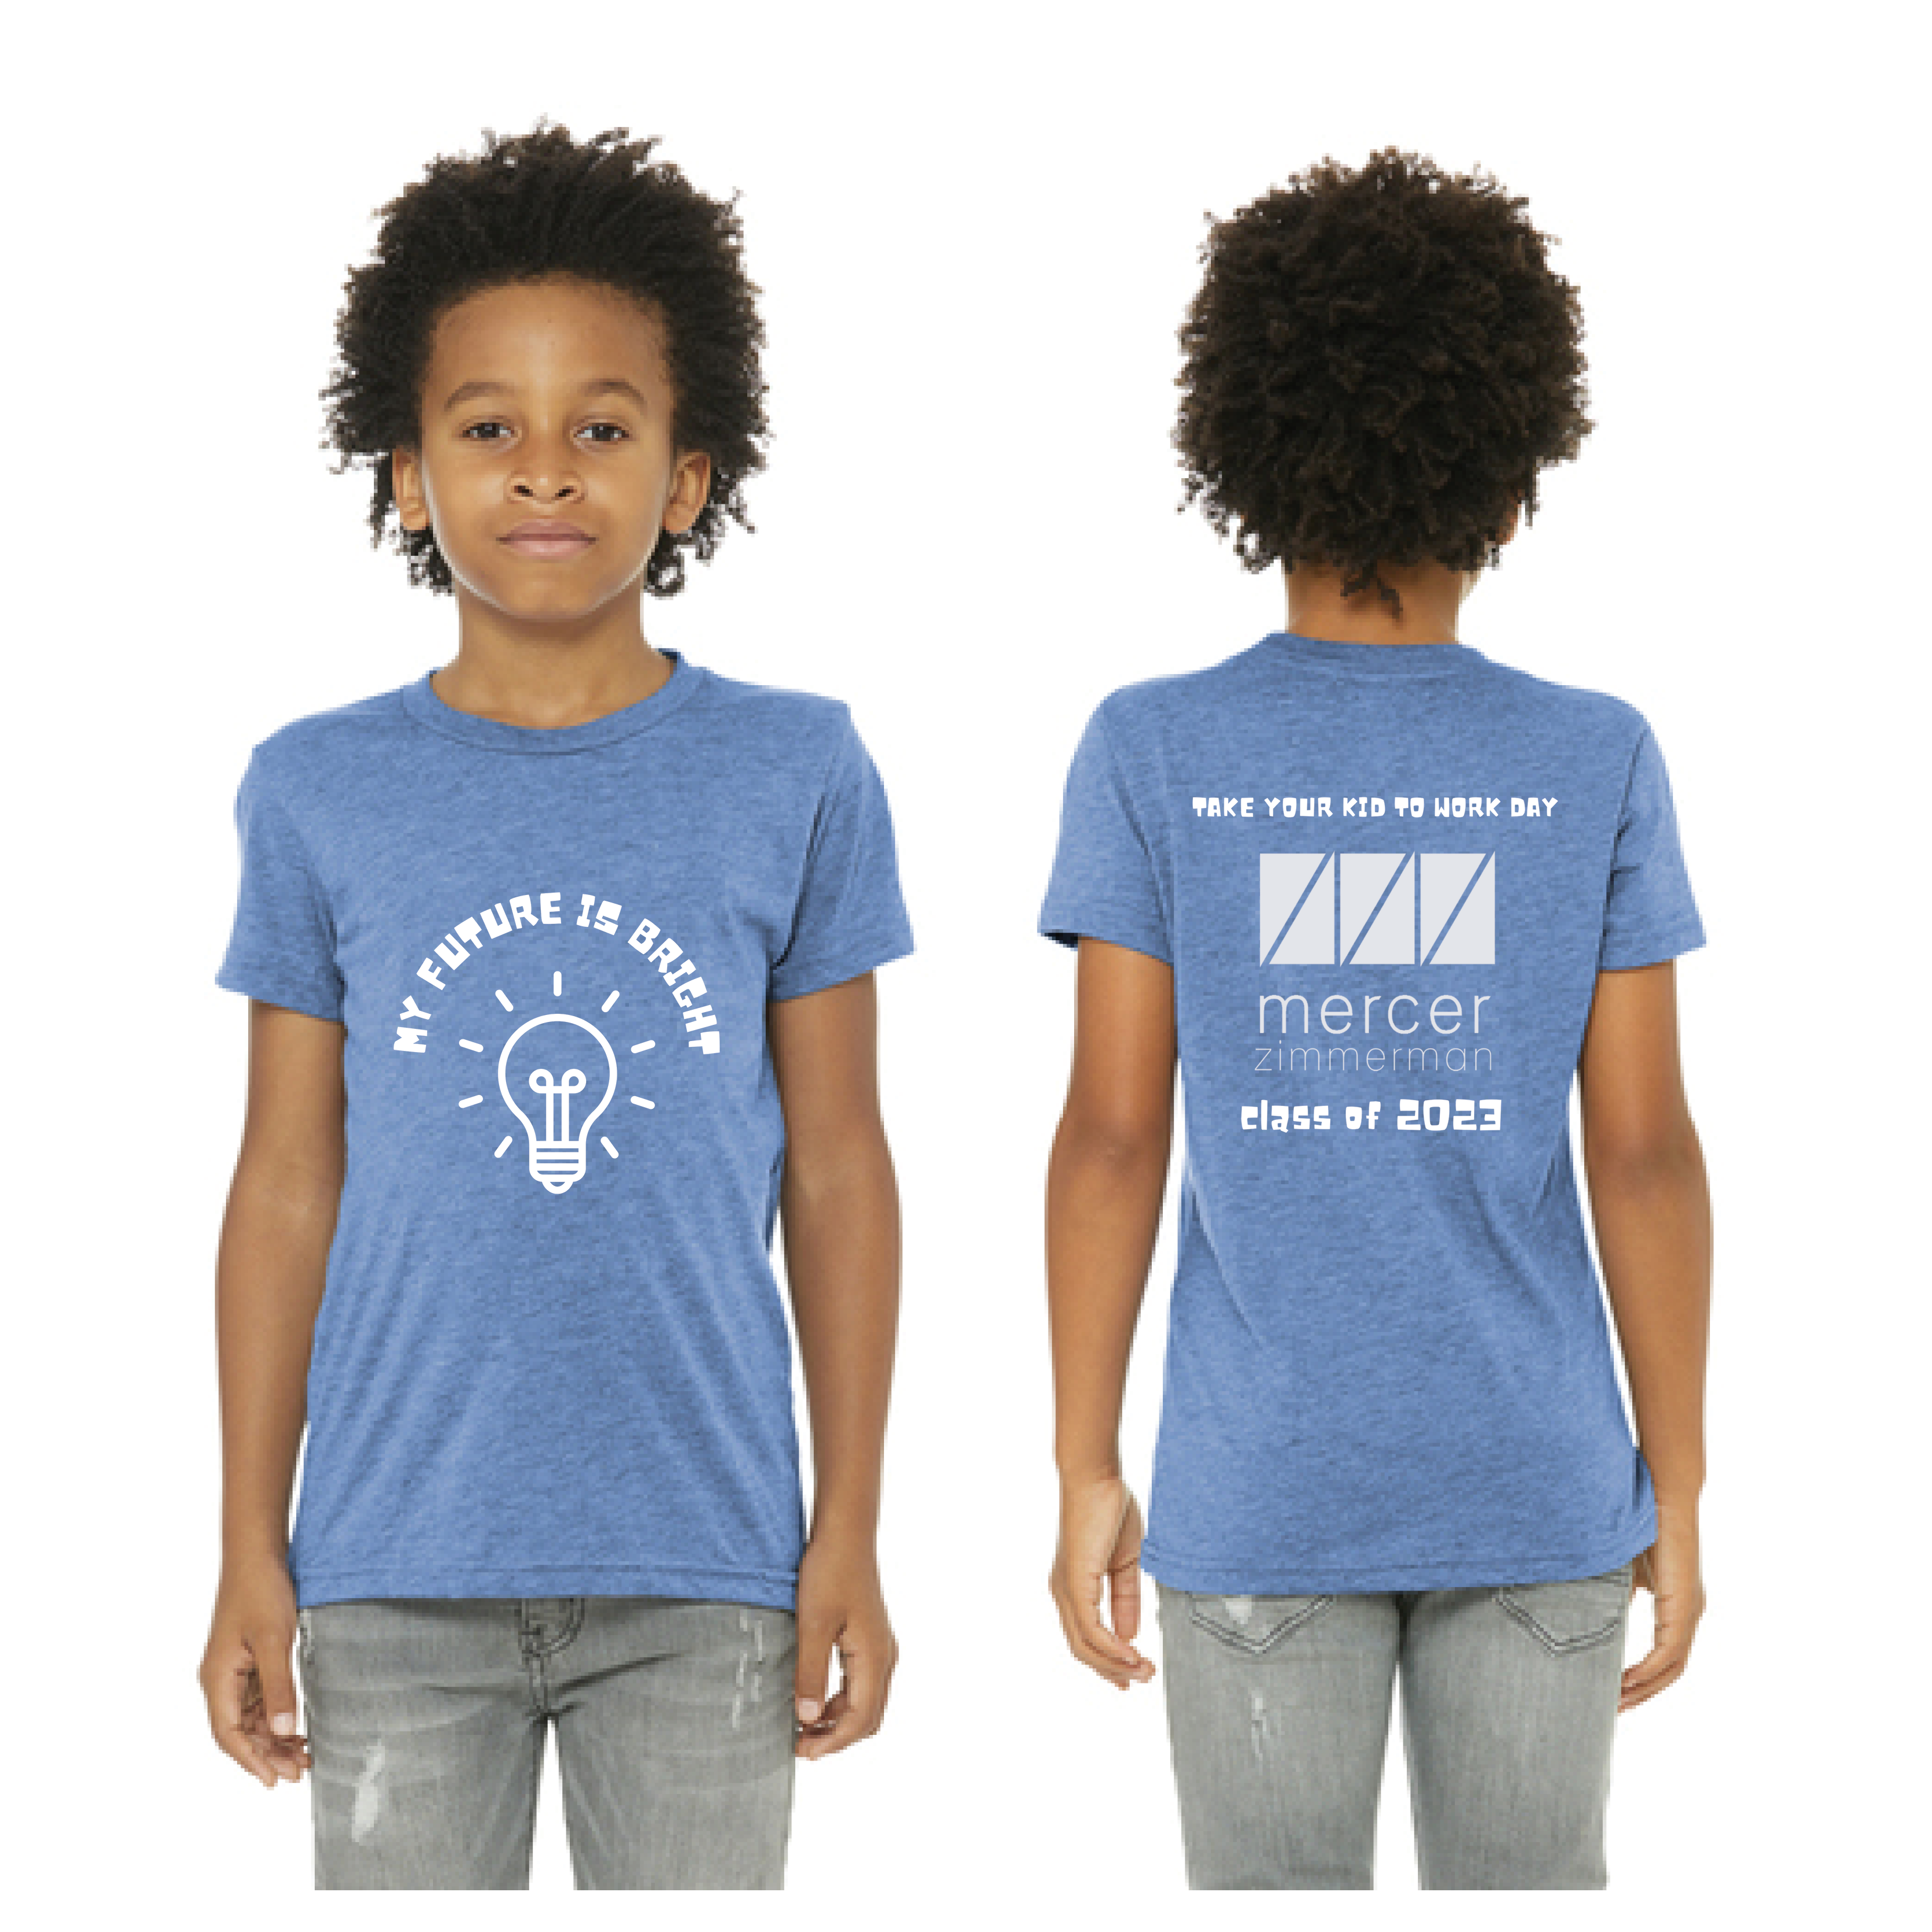 Take Your Kid To Work Day T-Shirt